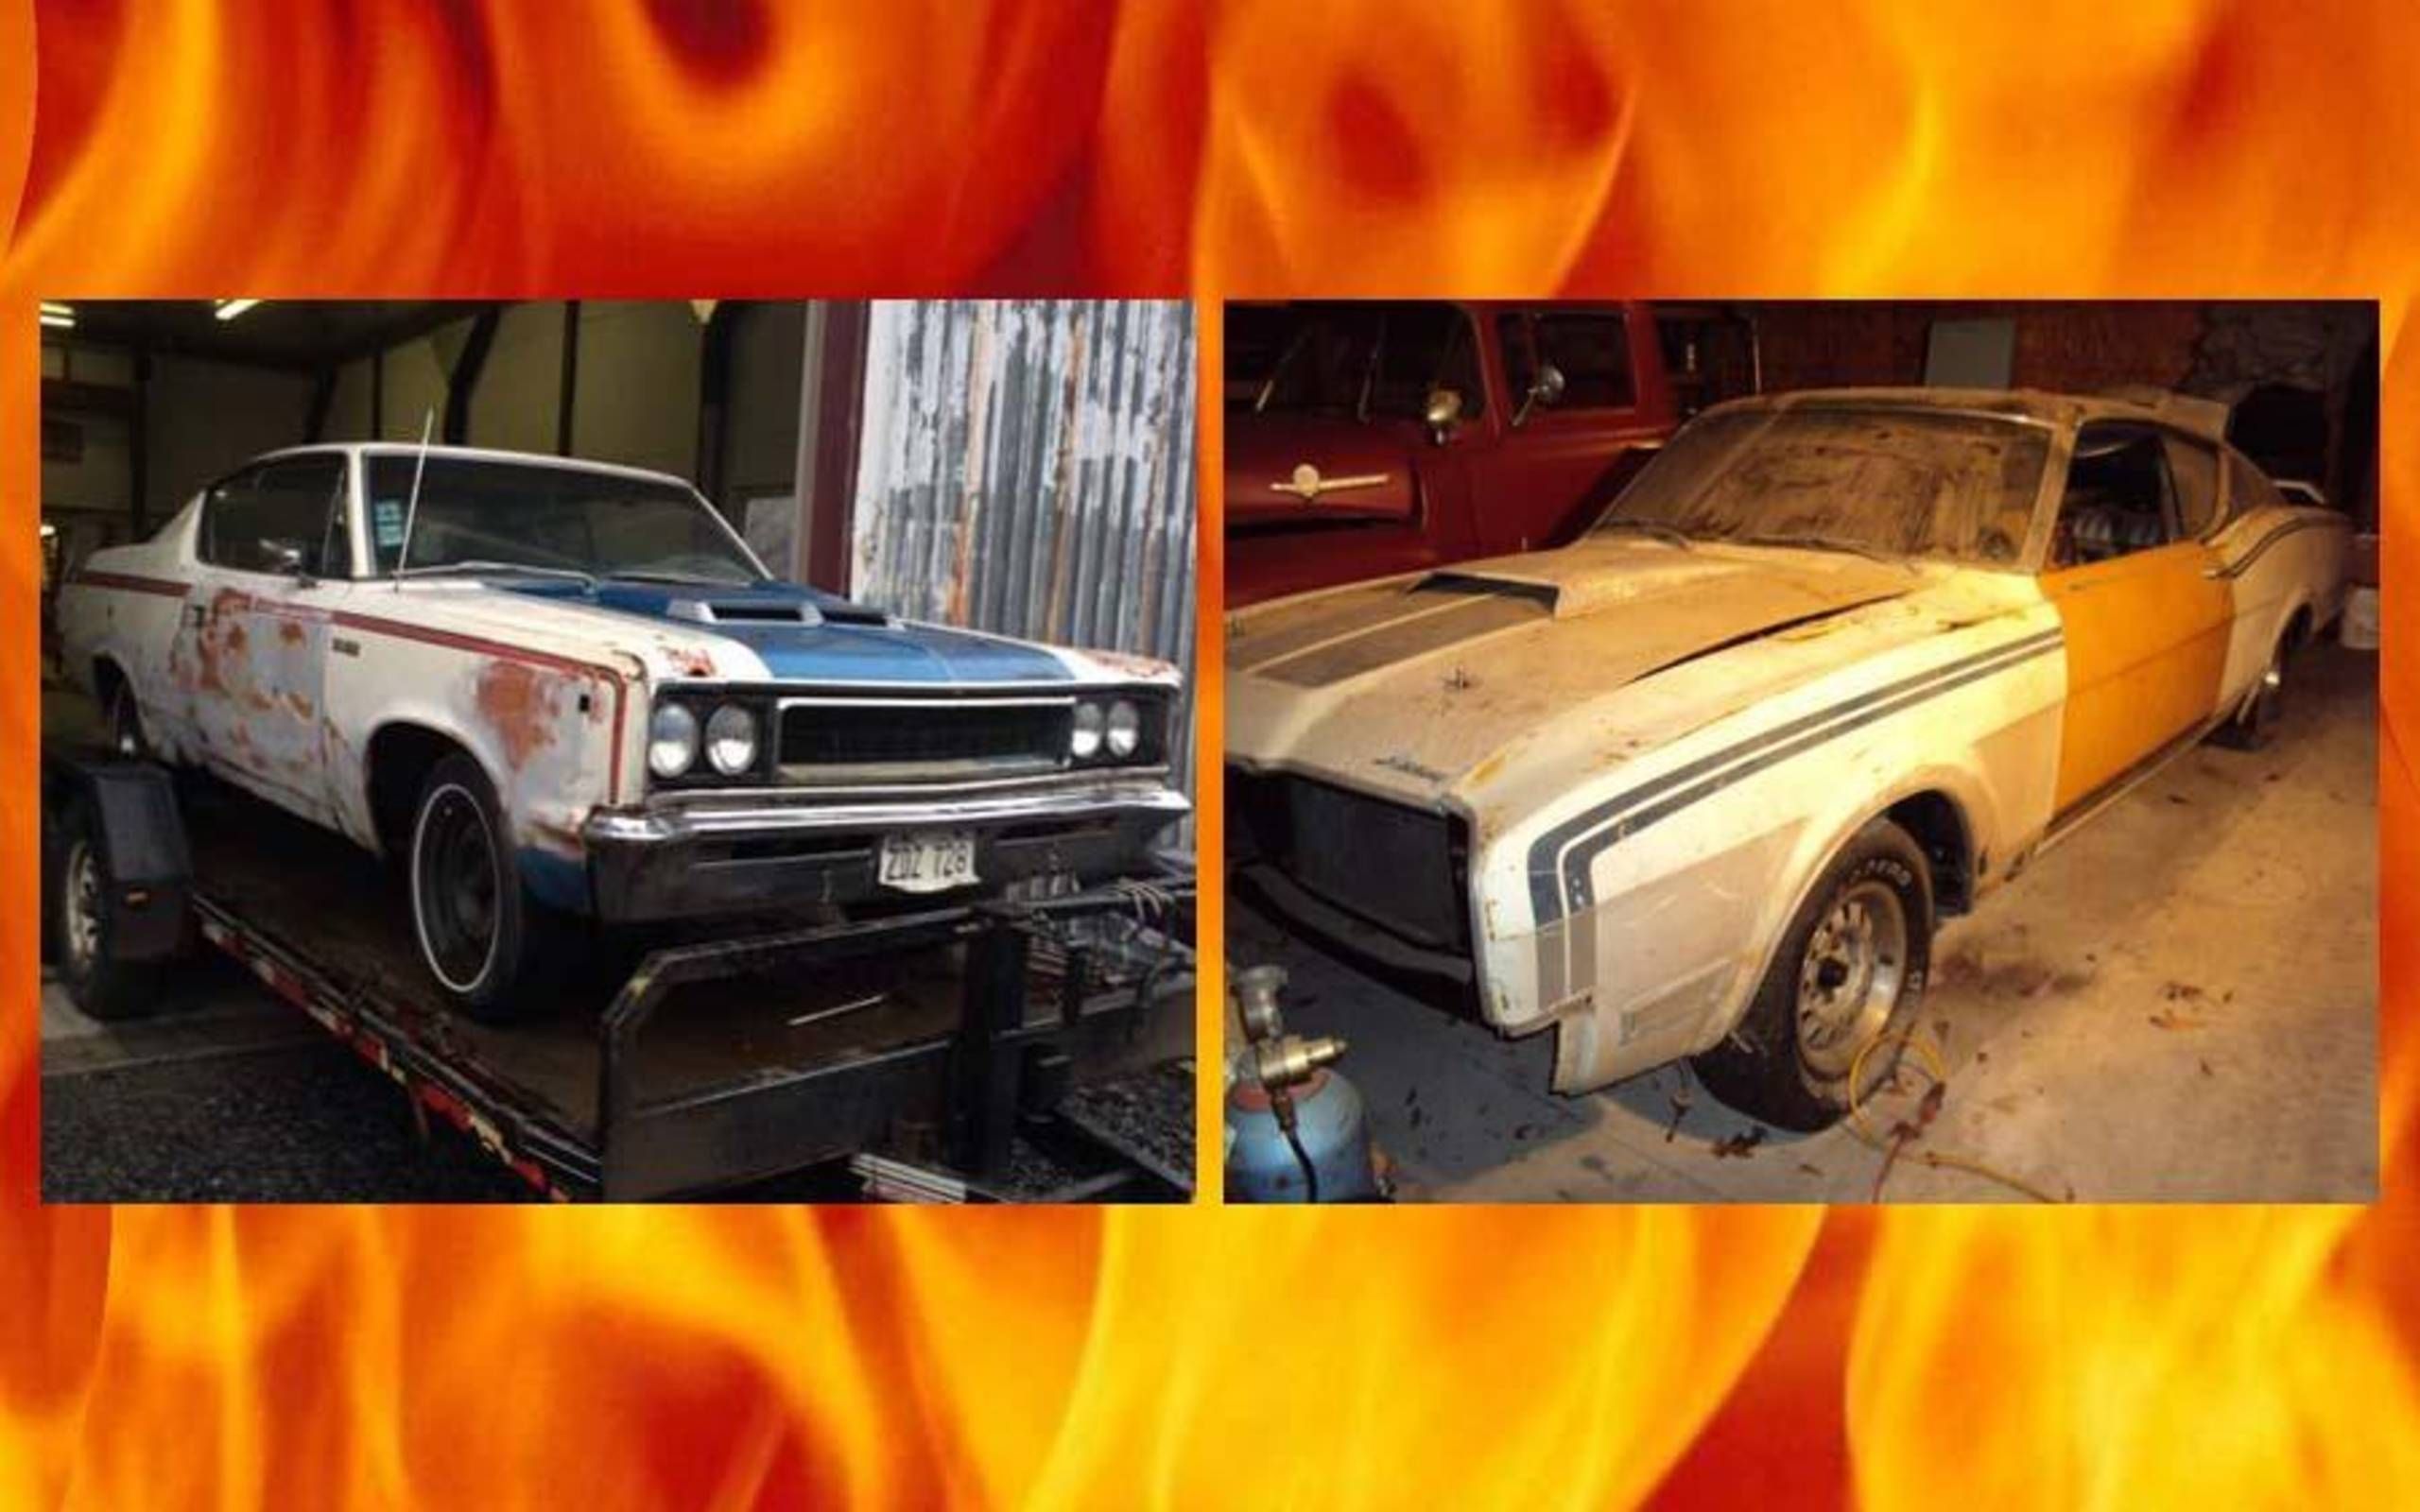 Flames, Mags, and a Hurst Shifter Were Once Standard Equipment for